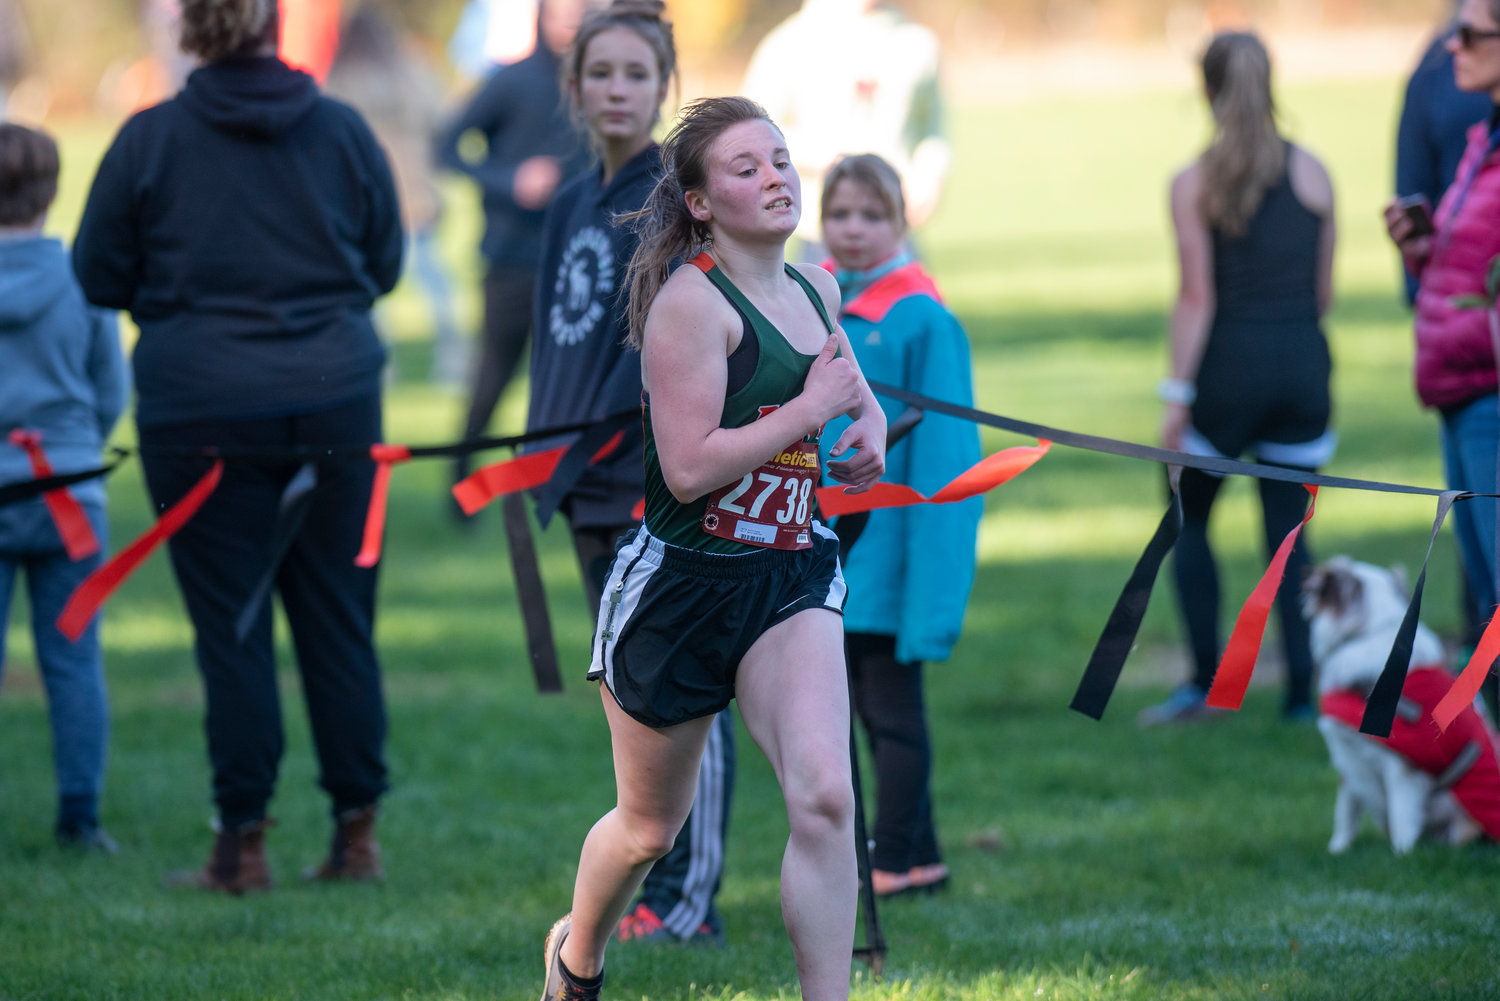 Morton-White Pass junior Ayricka Hughes crosses the finish line in 10th place to qualify for state at the 2B District 4 girls cross country championships Saturday in Rainier.